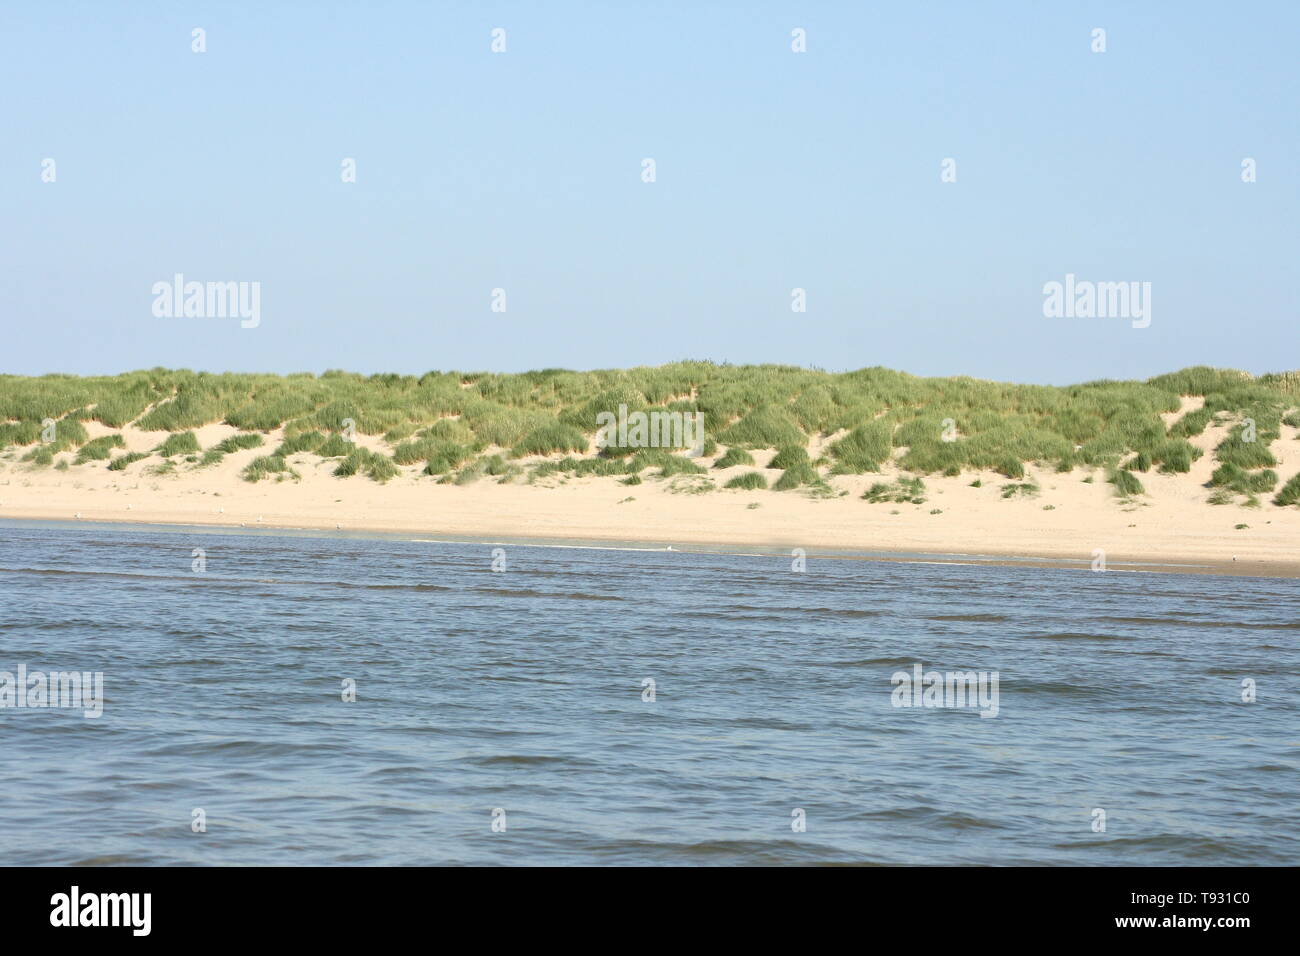 Sandy beach with sand dunes and blue sky in the background Stock Photo